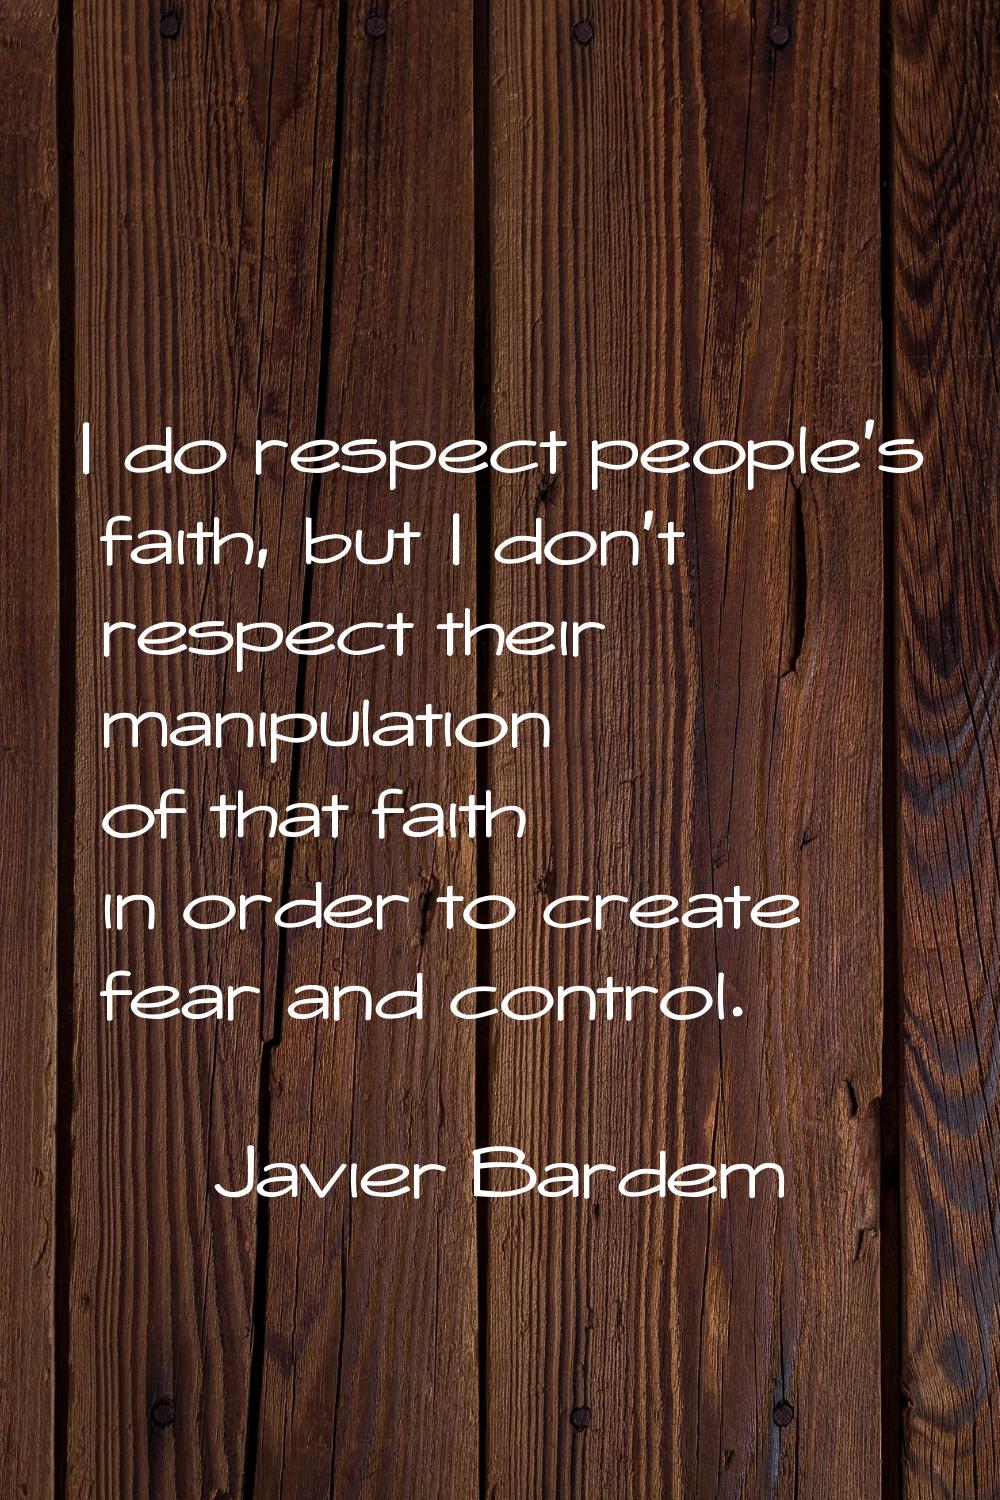 I do respect people's faith, but I don't respect their manipulation of that faith in order to creat